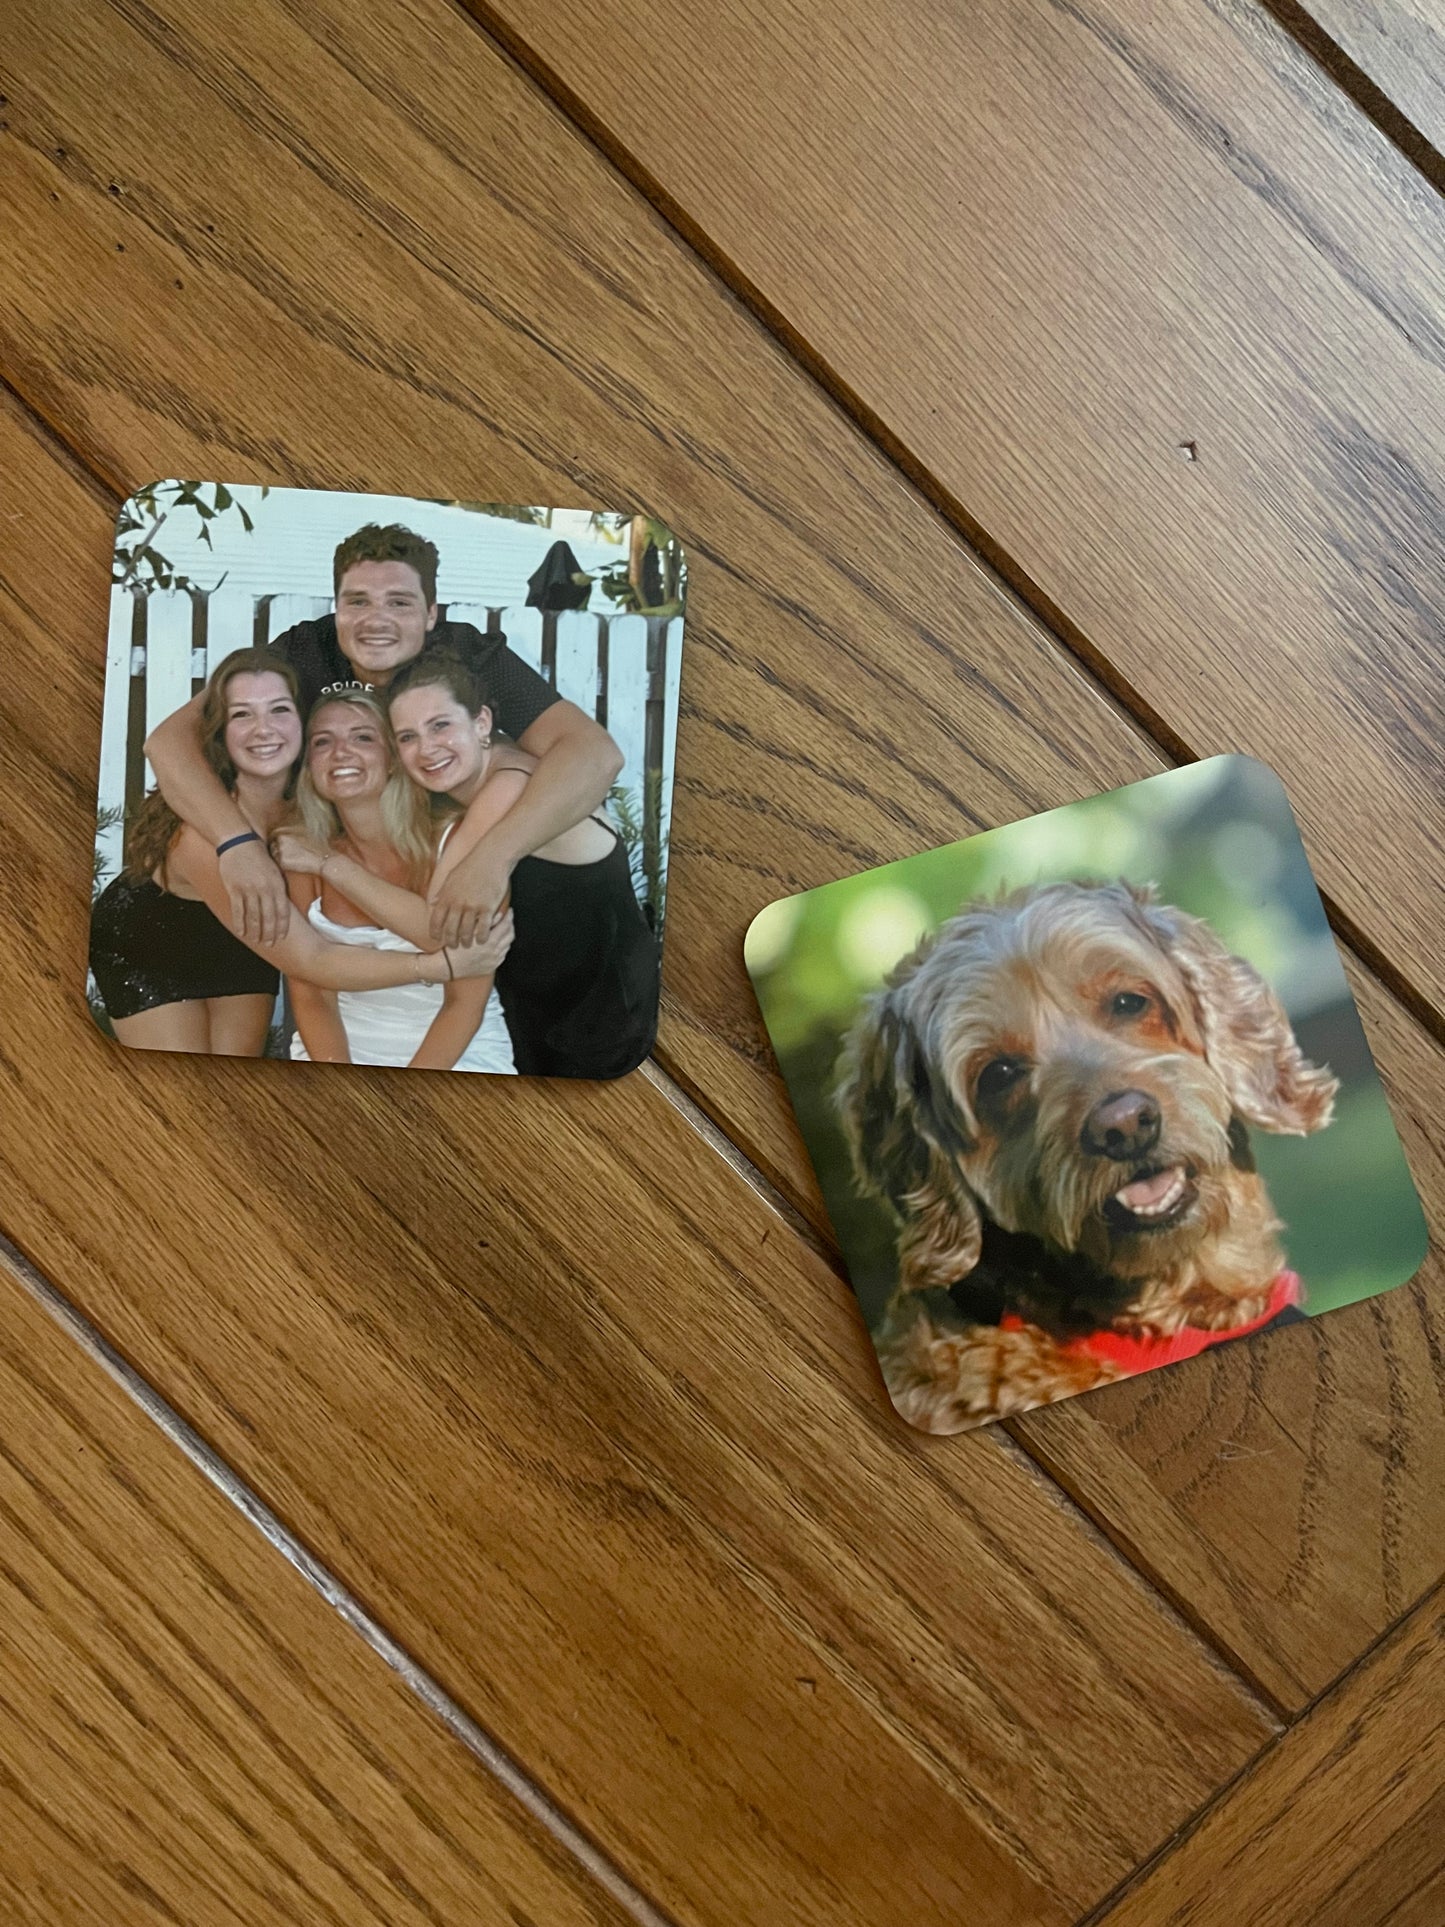 Coasters - 4" x 4" - Customize with your image and text